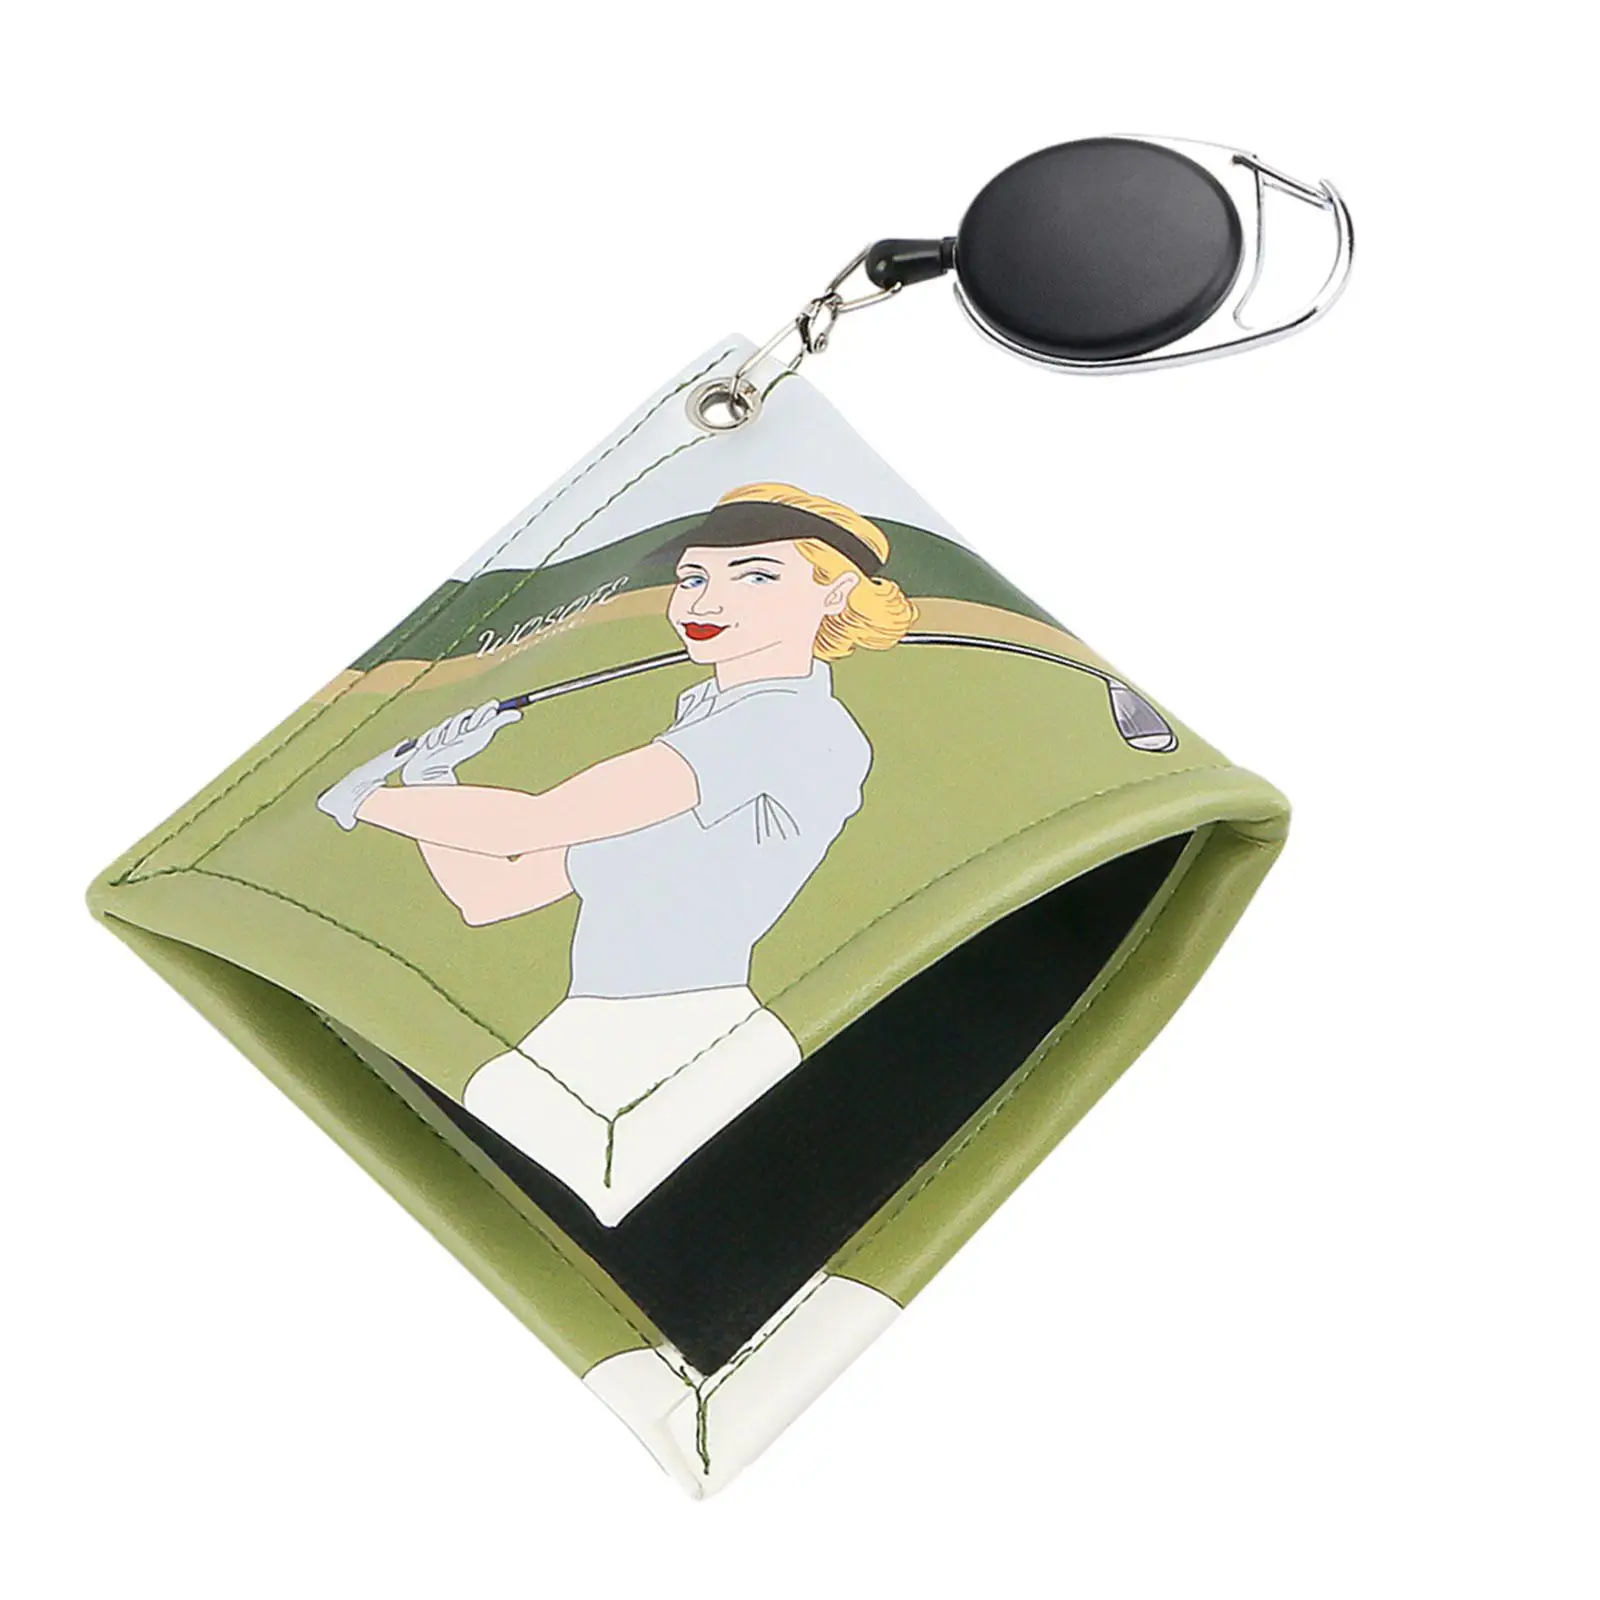 Golf Ball Towel Wiping Cloth W/ Retractable Keychain Strong Absorbent Toweling Golf Club Head Cleaner Golf Ball Cleaner Pocket